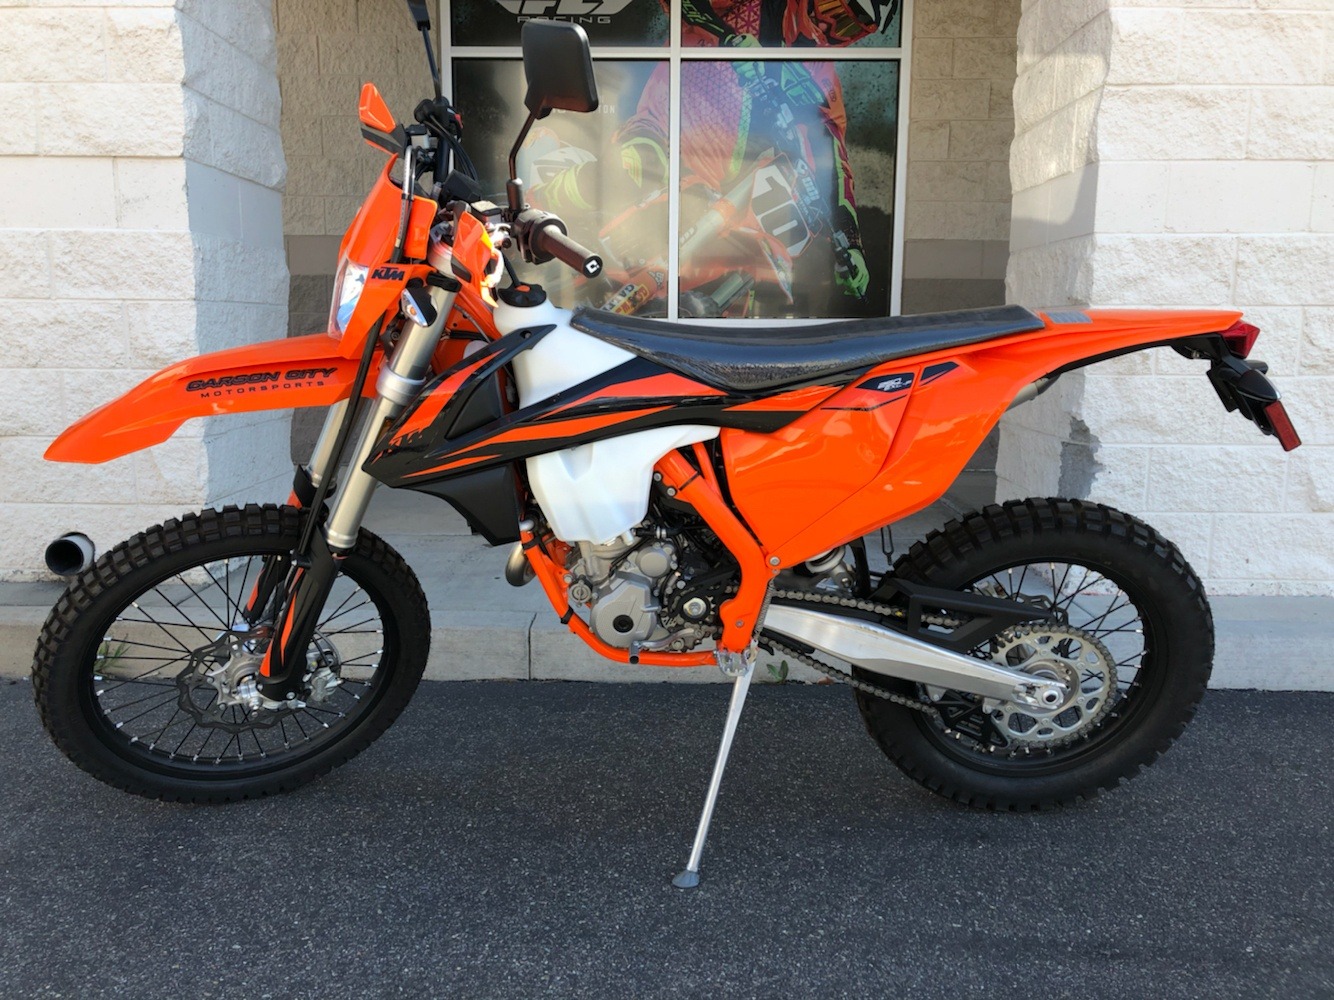 New 2019 KTM 250 EXC-F Motorcycles in Carson City, NV | Stock Number: K199796